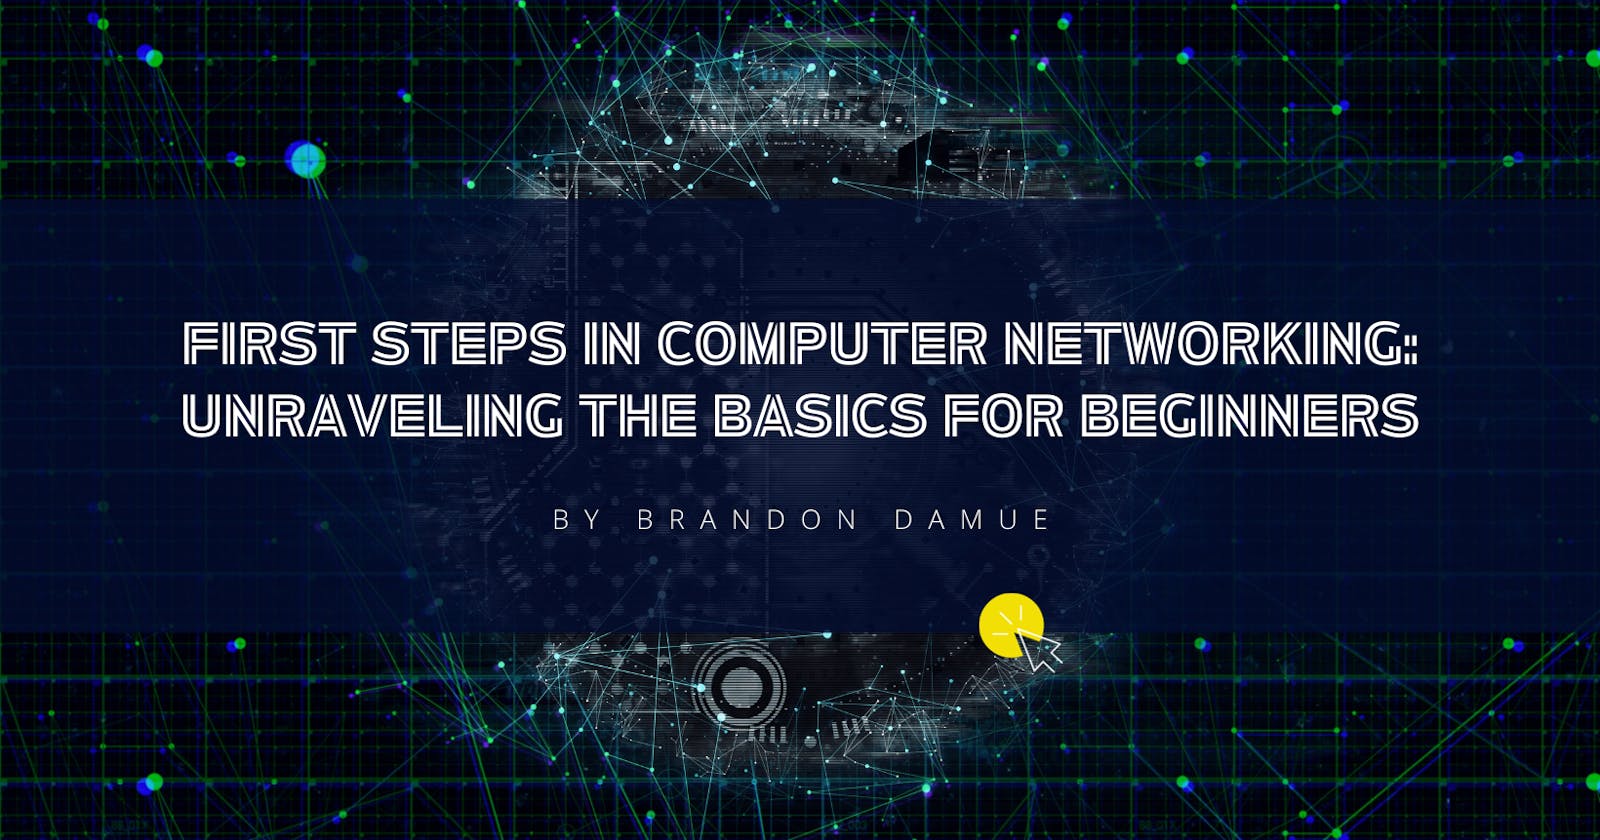 First Steps in Computer Networking: Unraveling the Basics for Beginners